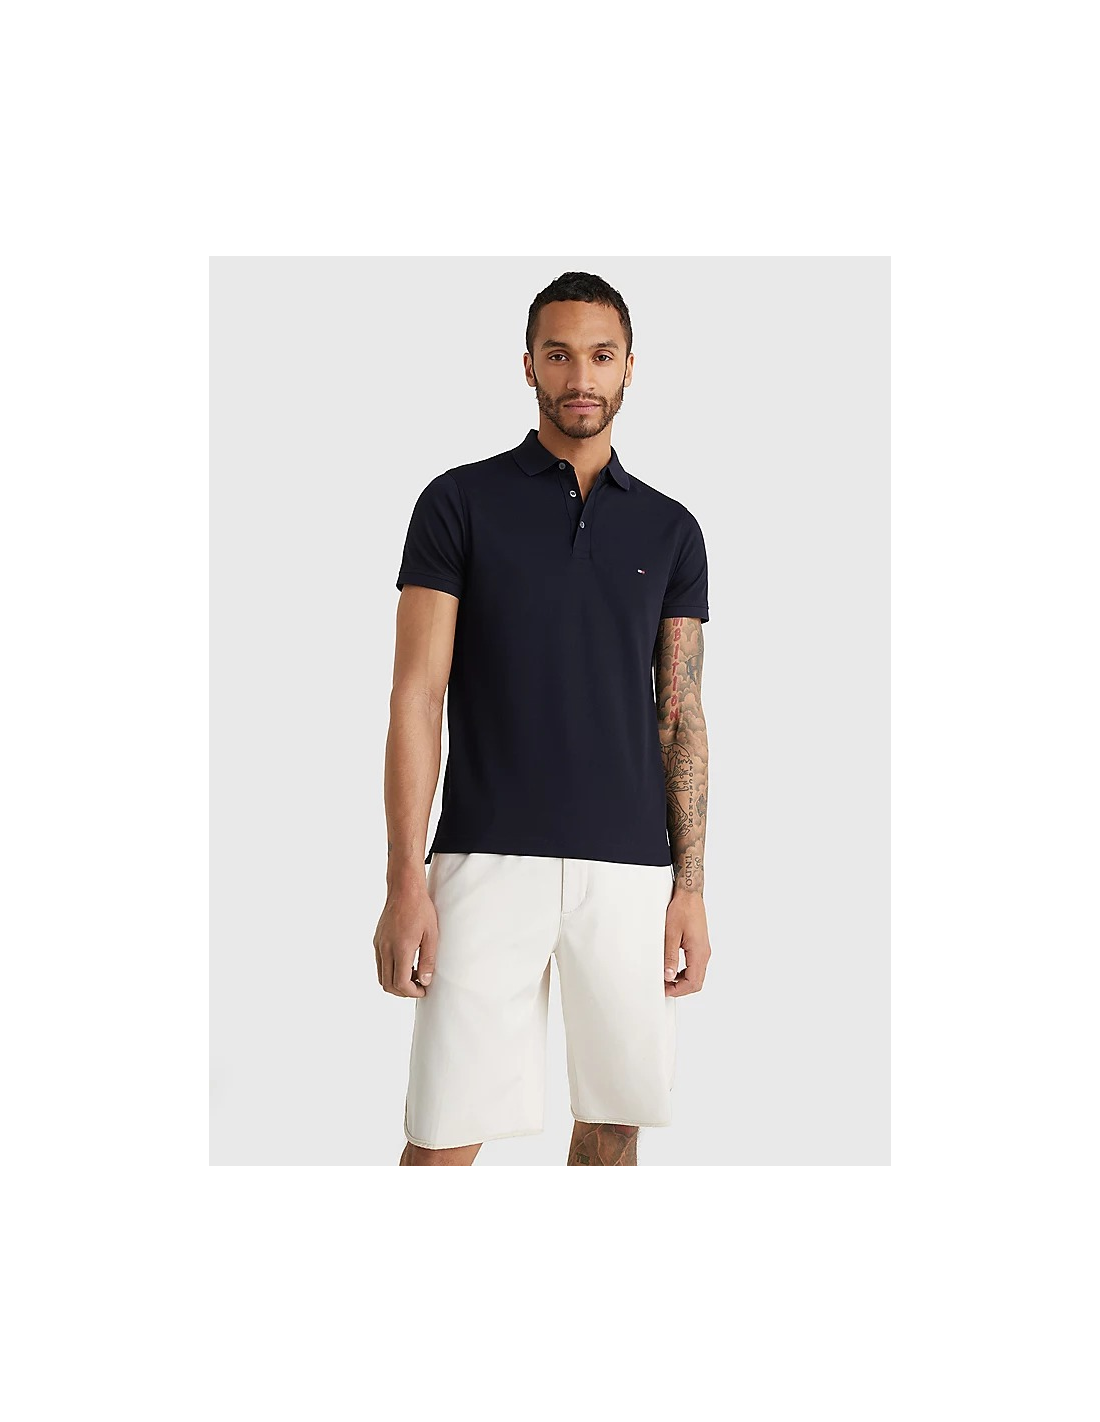 Tommy Hilfiger slim fit polo shirt with contrast zip Talla M Color DESERT  SKY